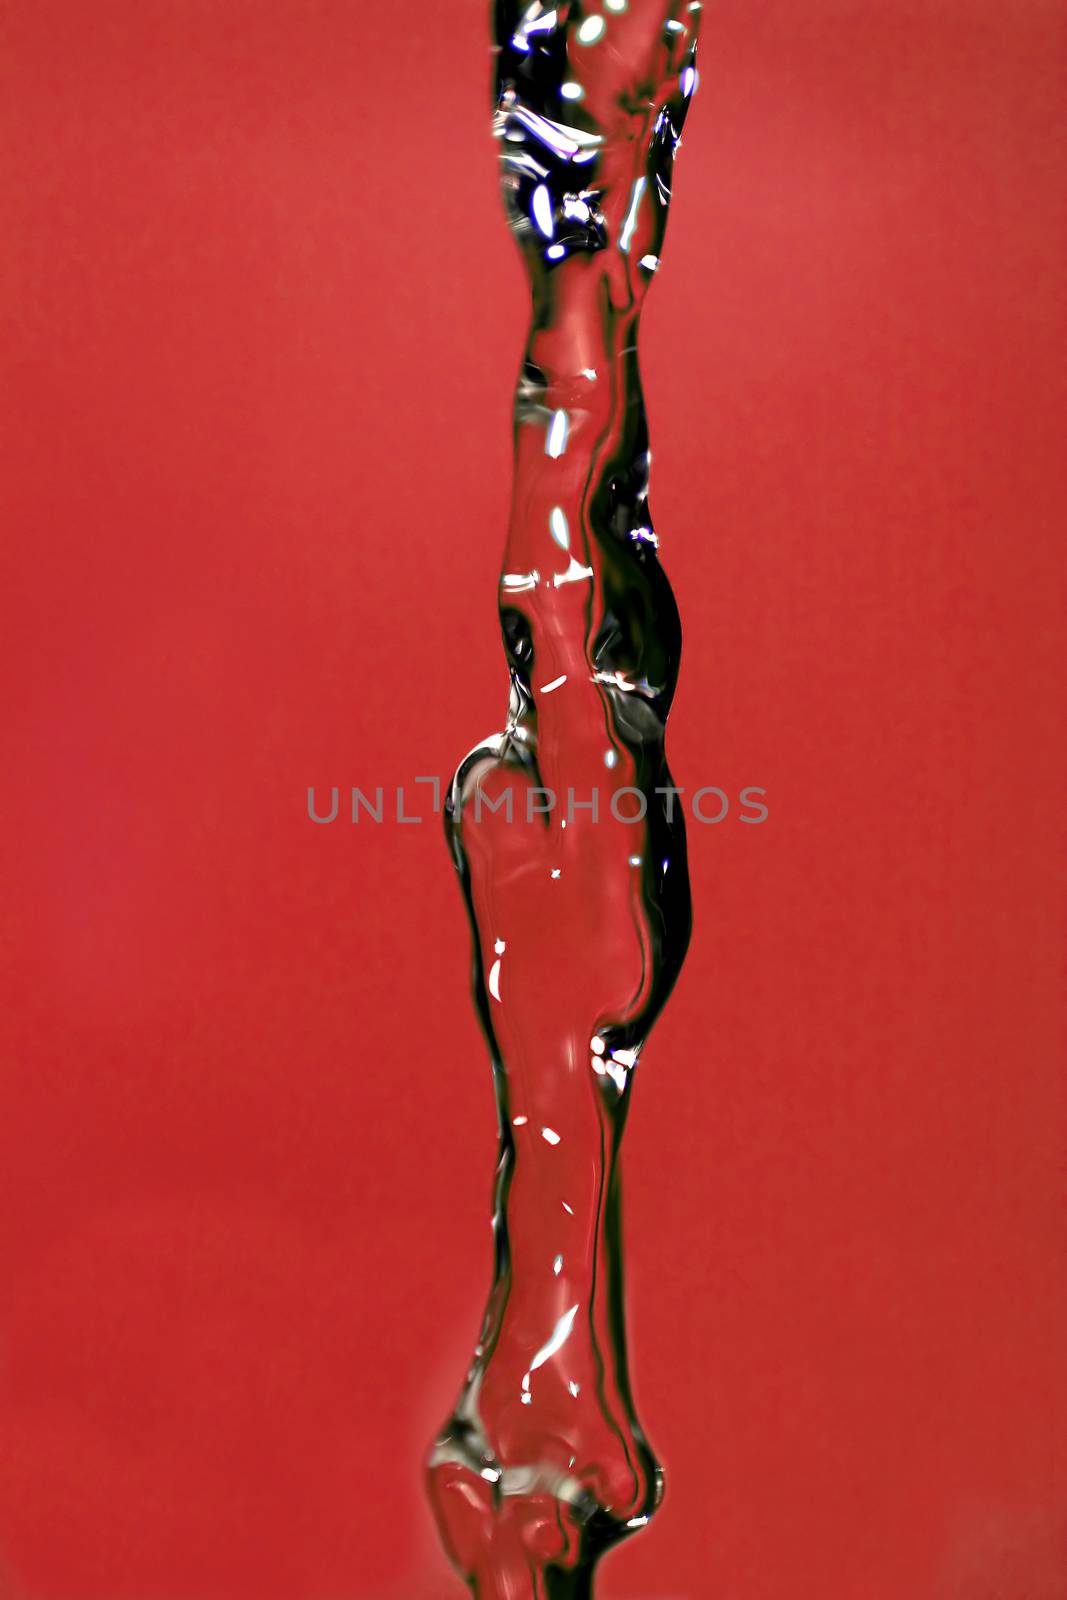 Water falling down, frozen in time with red background.